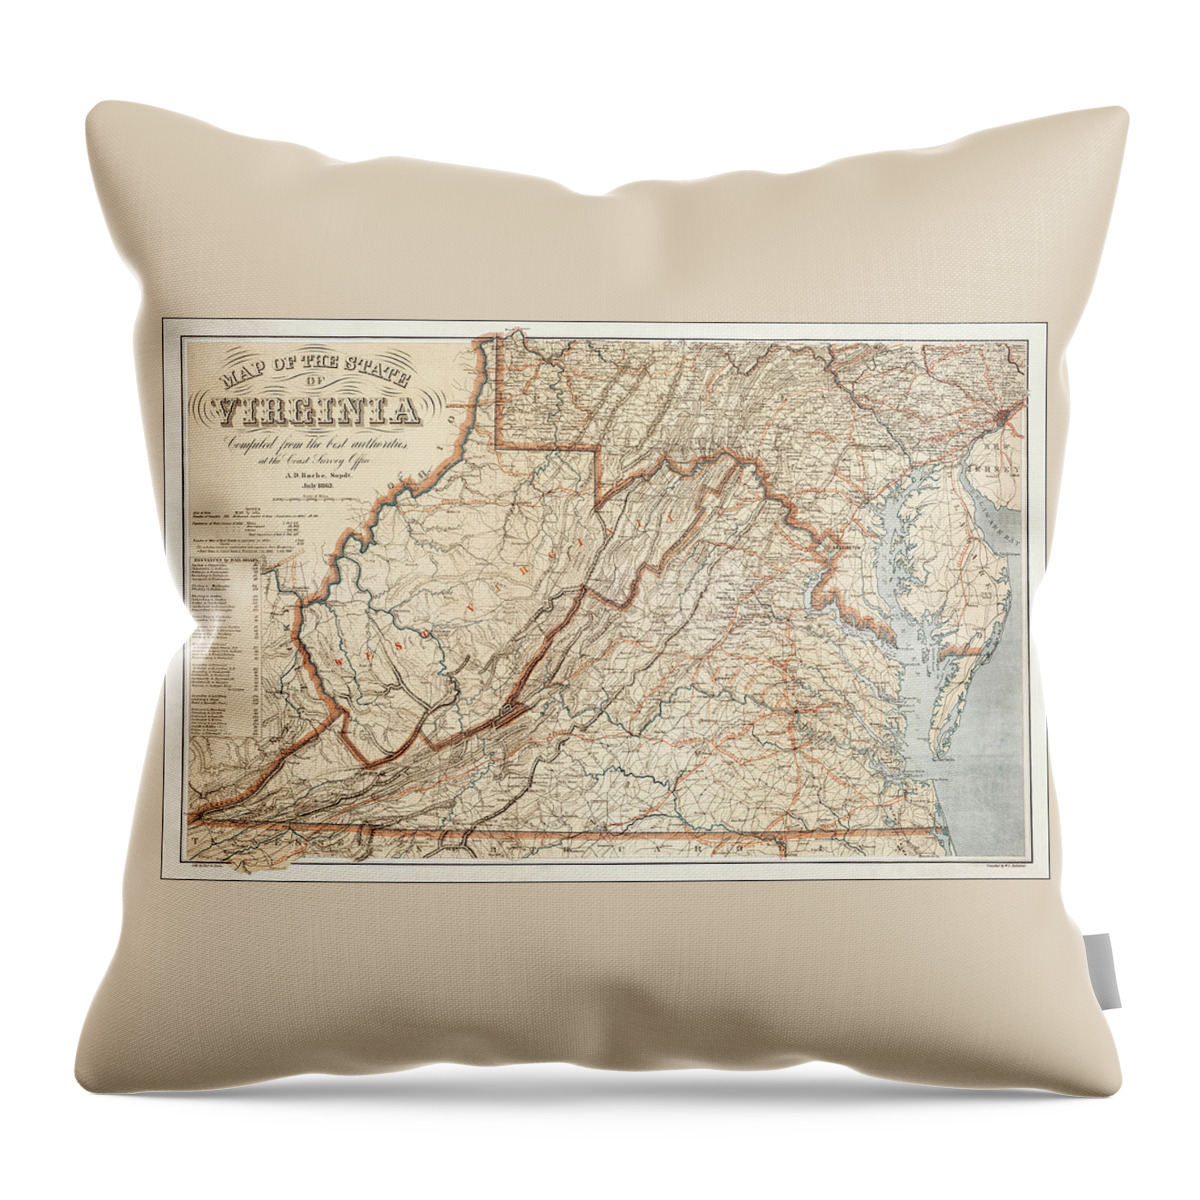 Virginia Throw Pillow featuring the photograph State of Virginia Vintage Map 1863 by Carol Japp